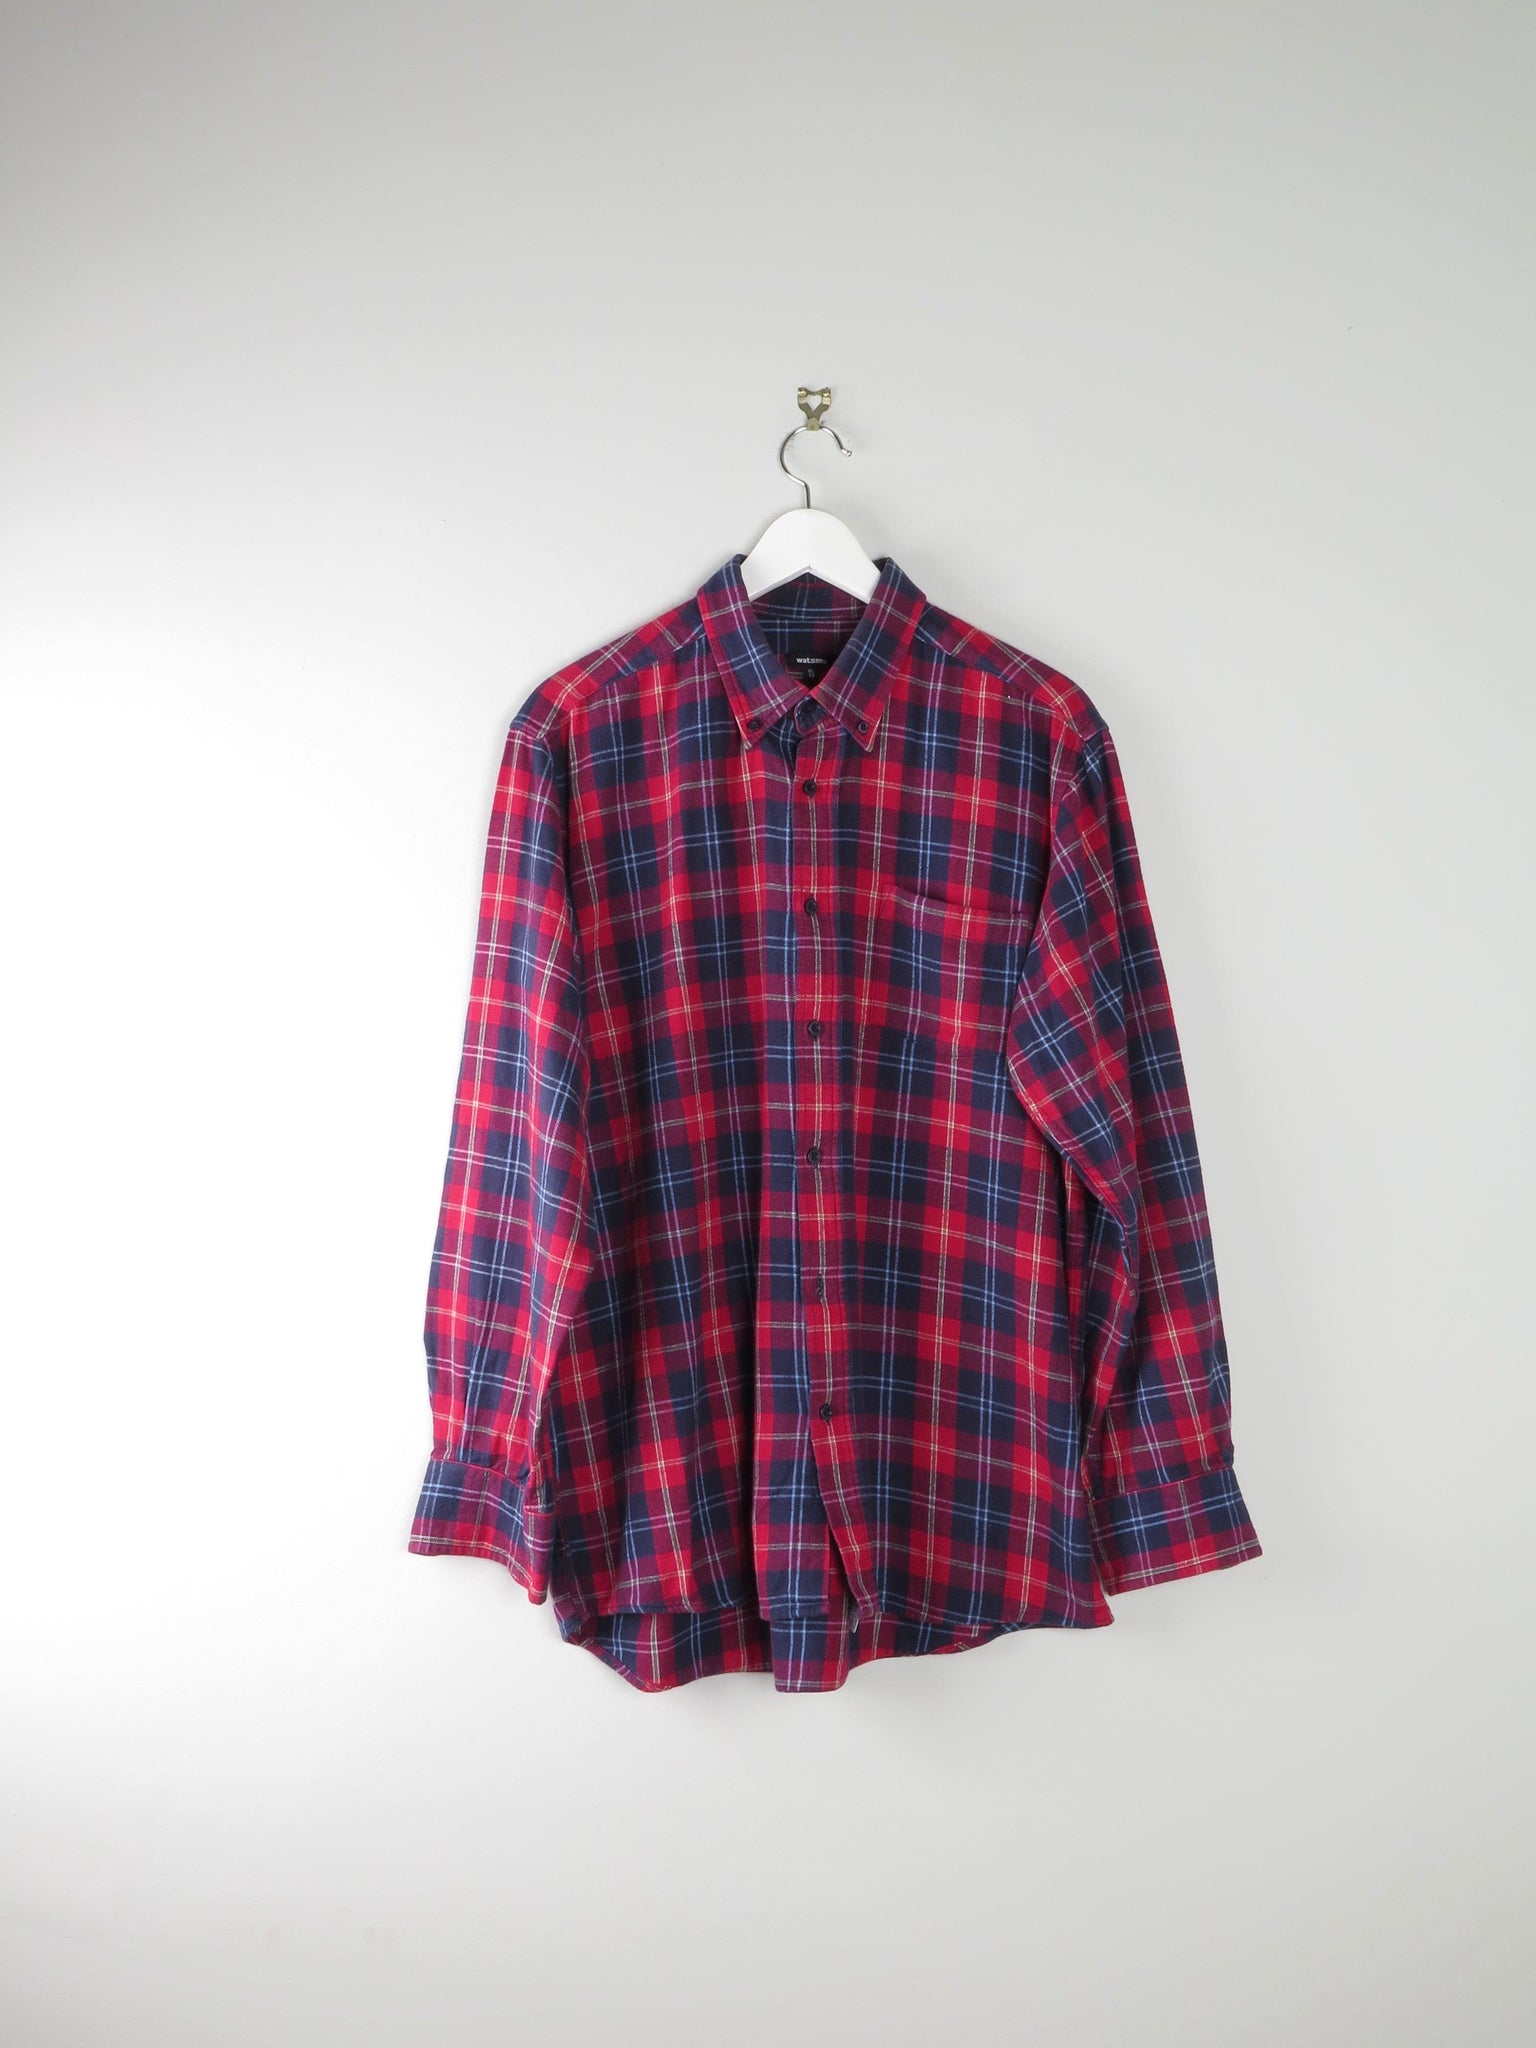 Men's Red & Navy Checked Flannel Shirt L/XL - The Harlequin